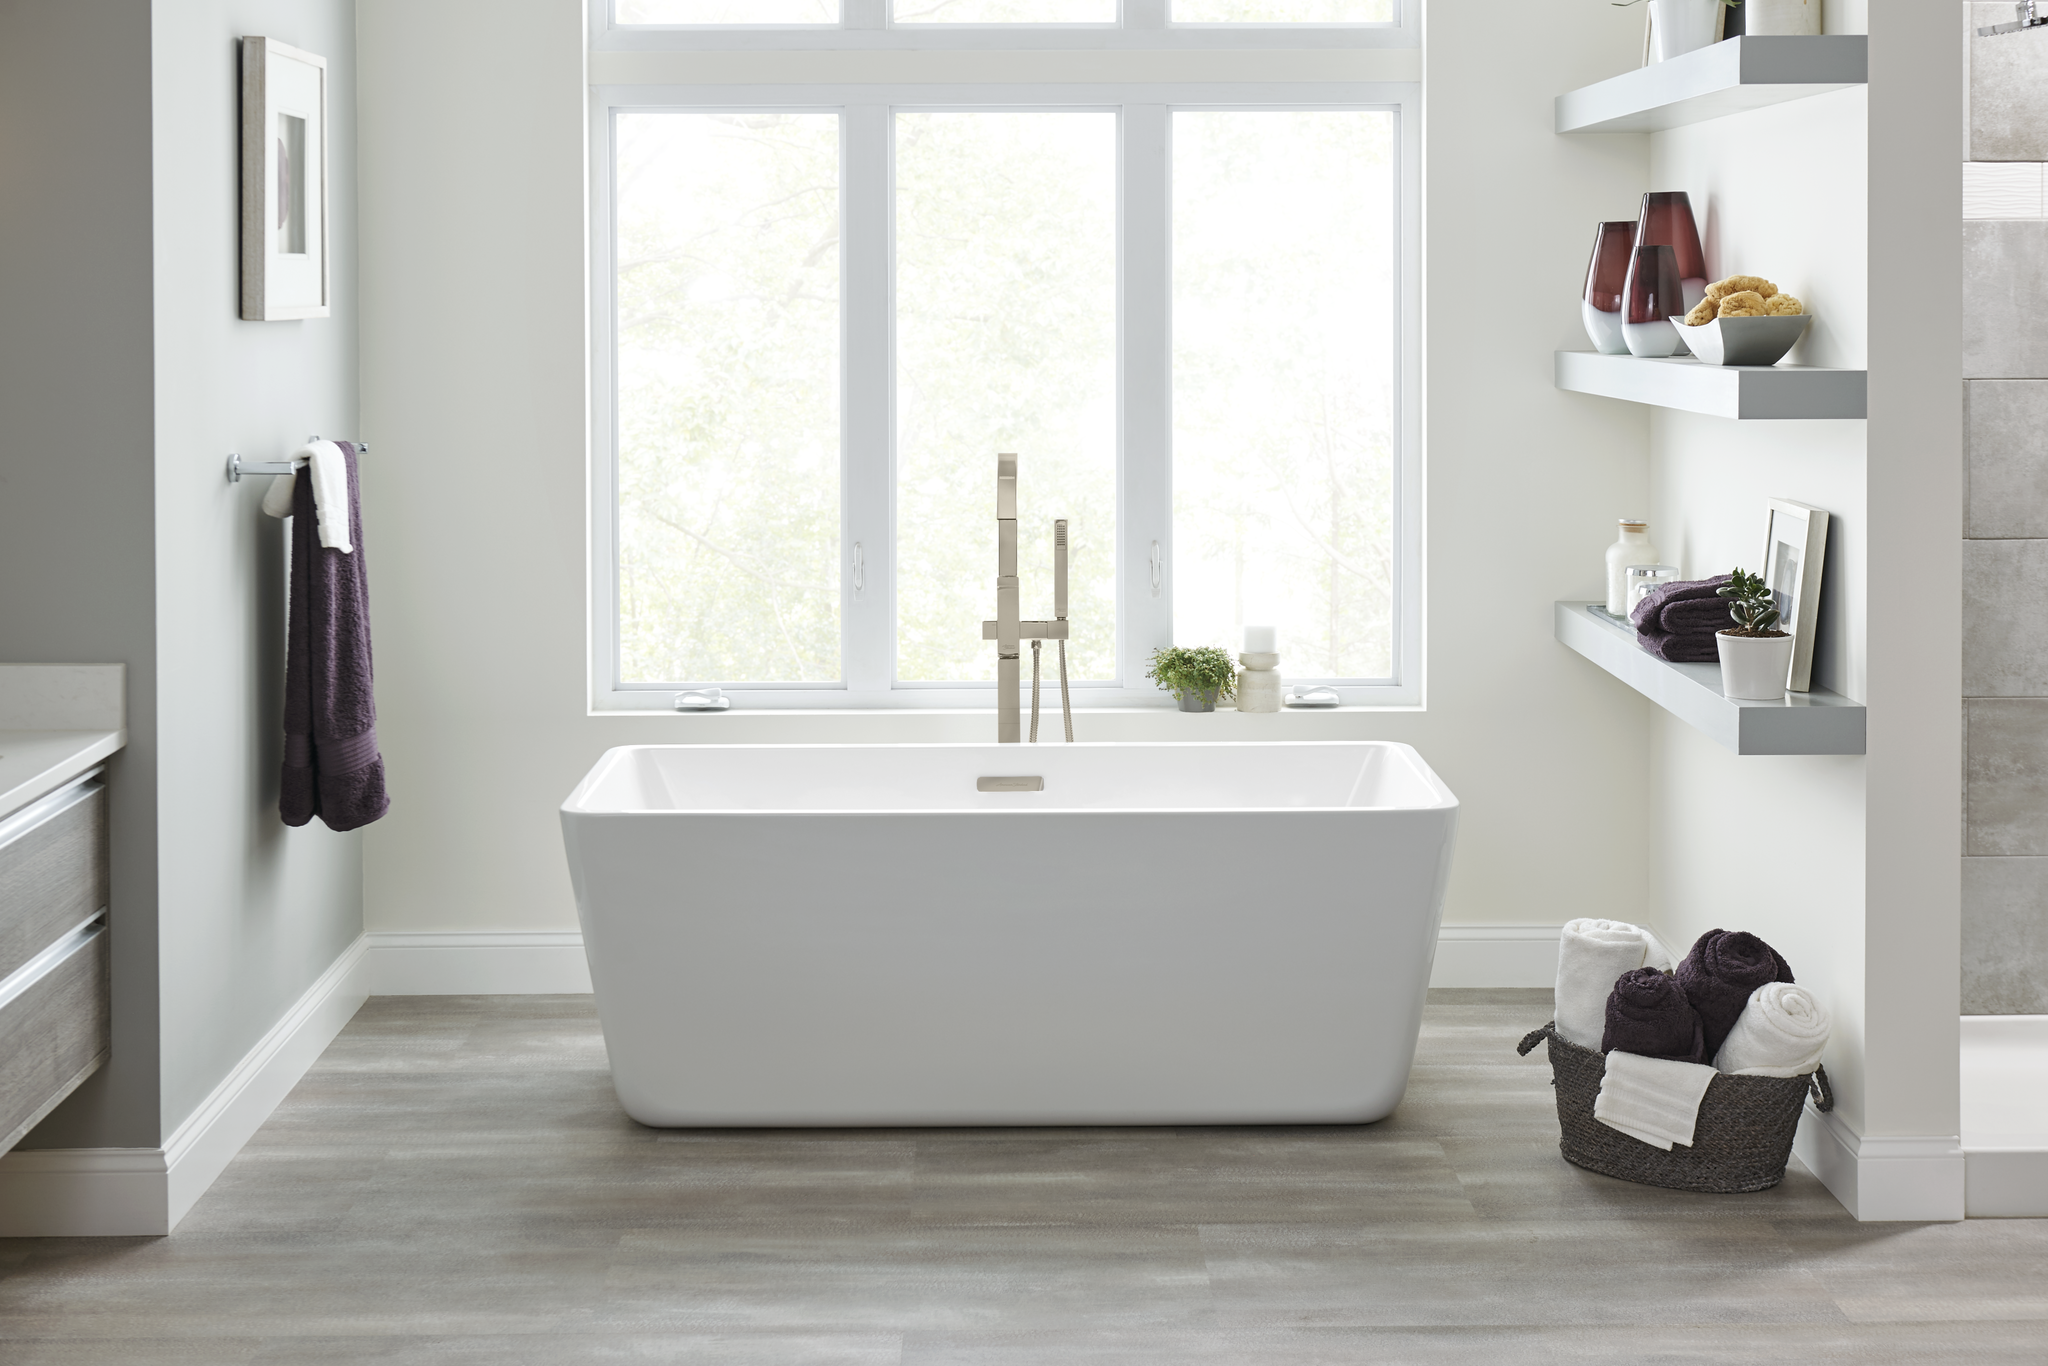 bath tub and accessories on display at the immerse showroom in st. louis